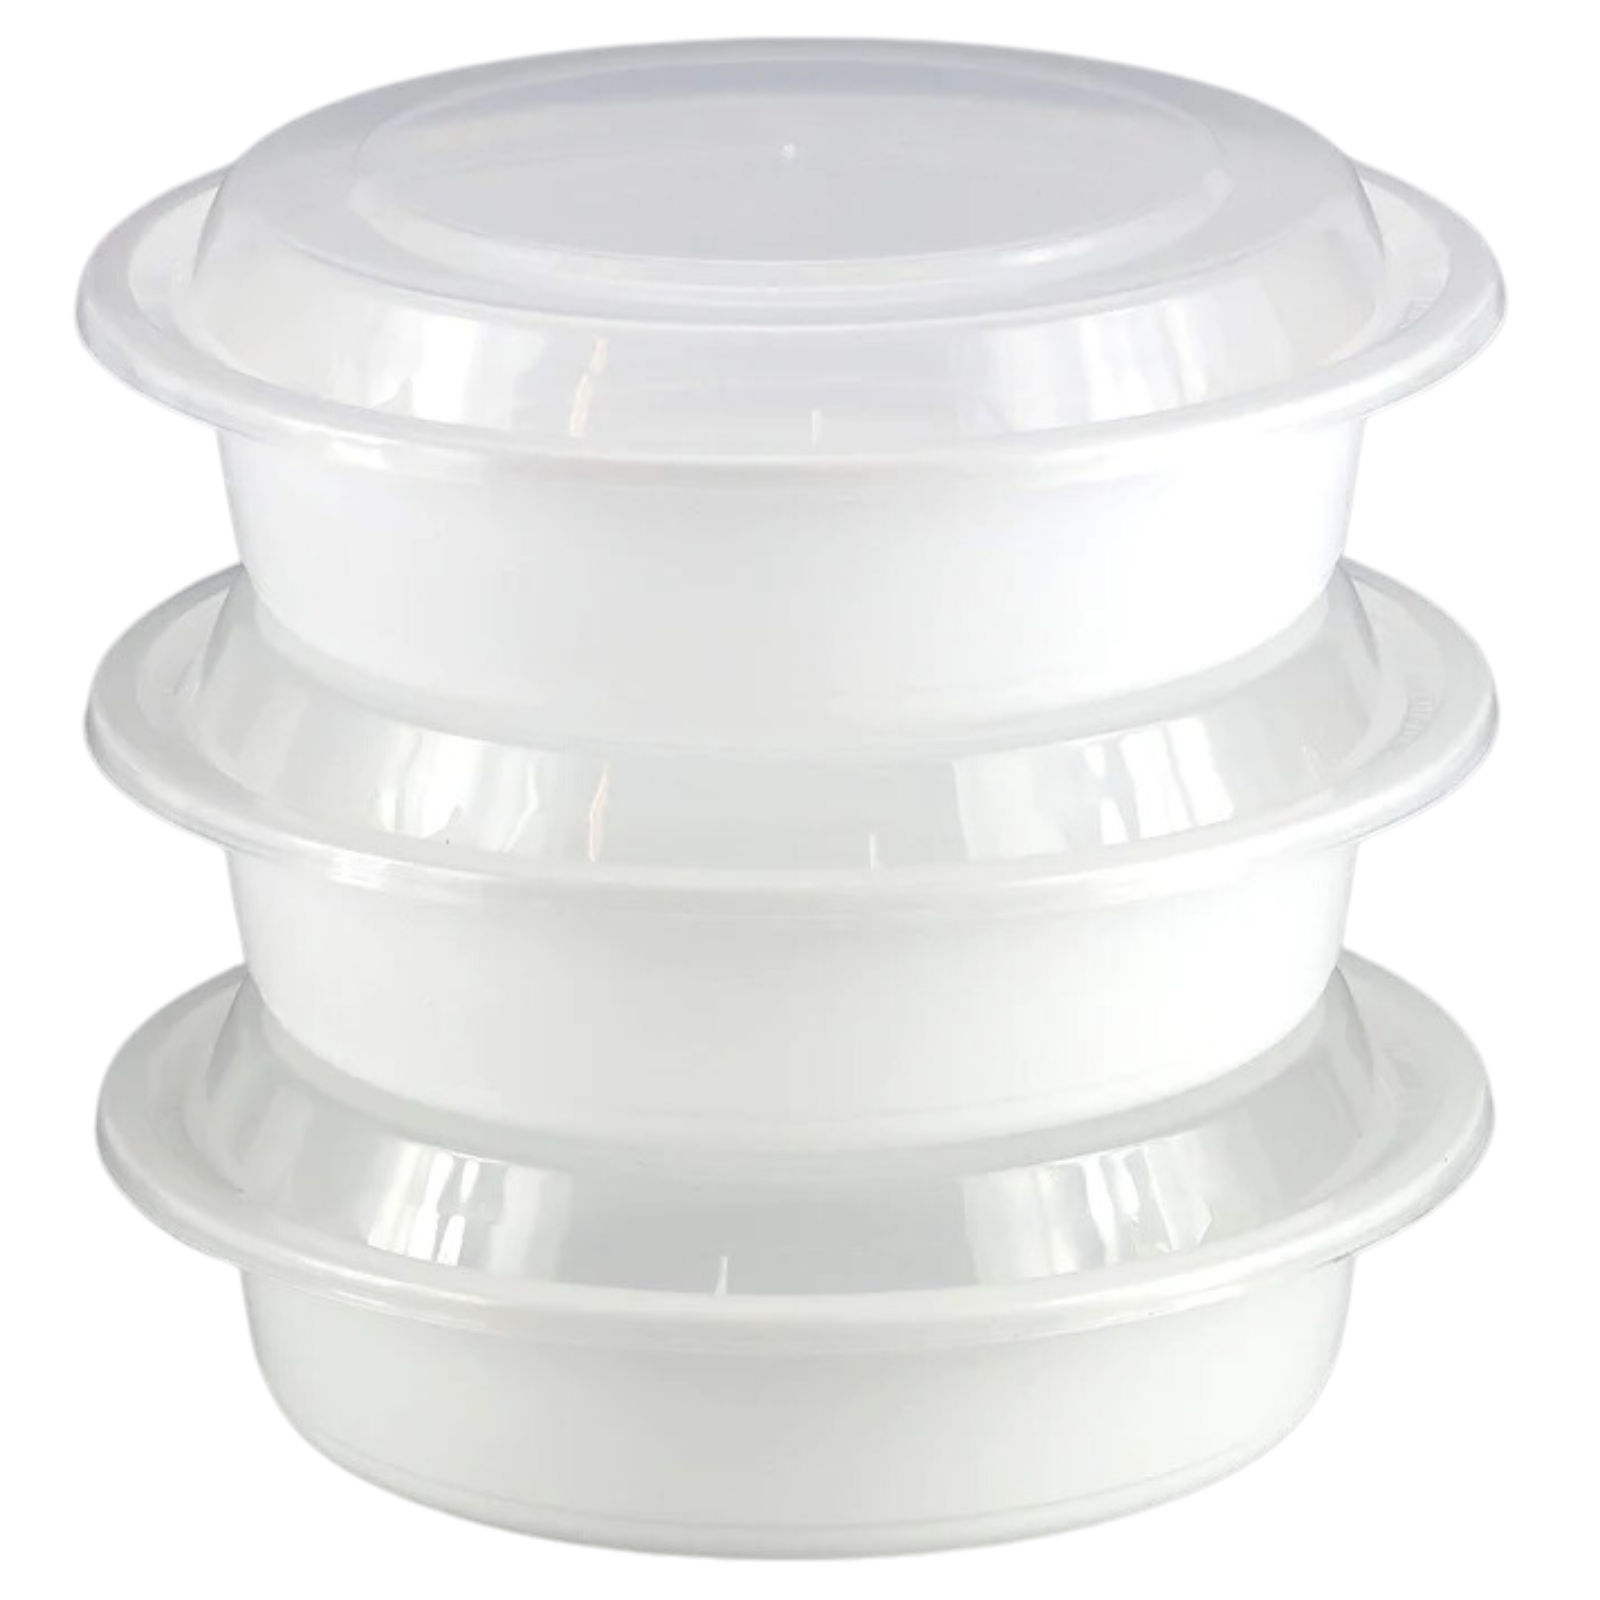 32oz Extra Strong Quality White round Disposable Meal Prep/ Bento Box Container Food Storage & Serving VeZee   